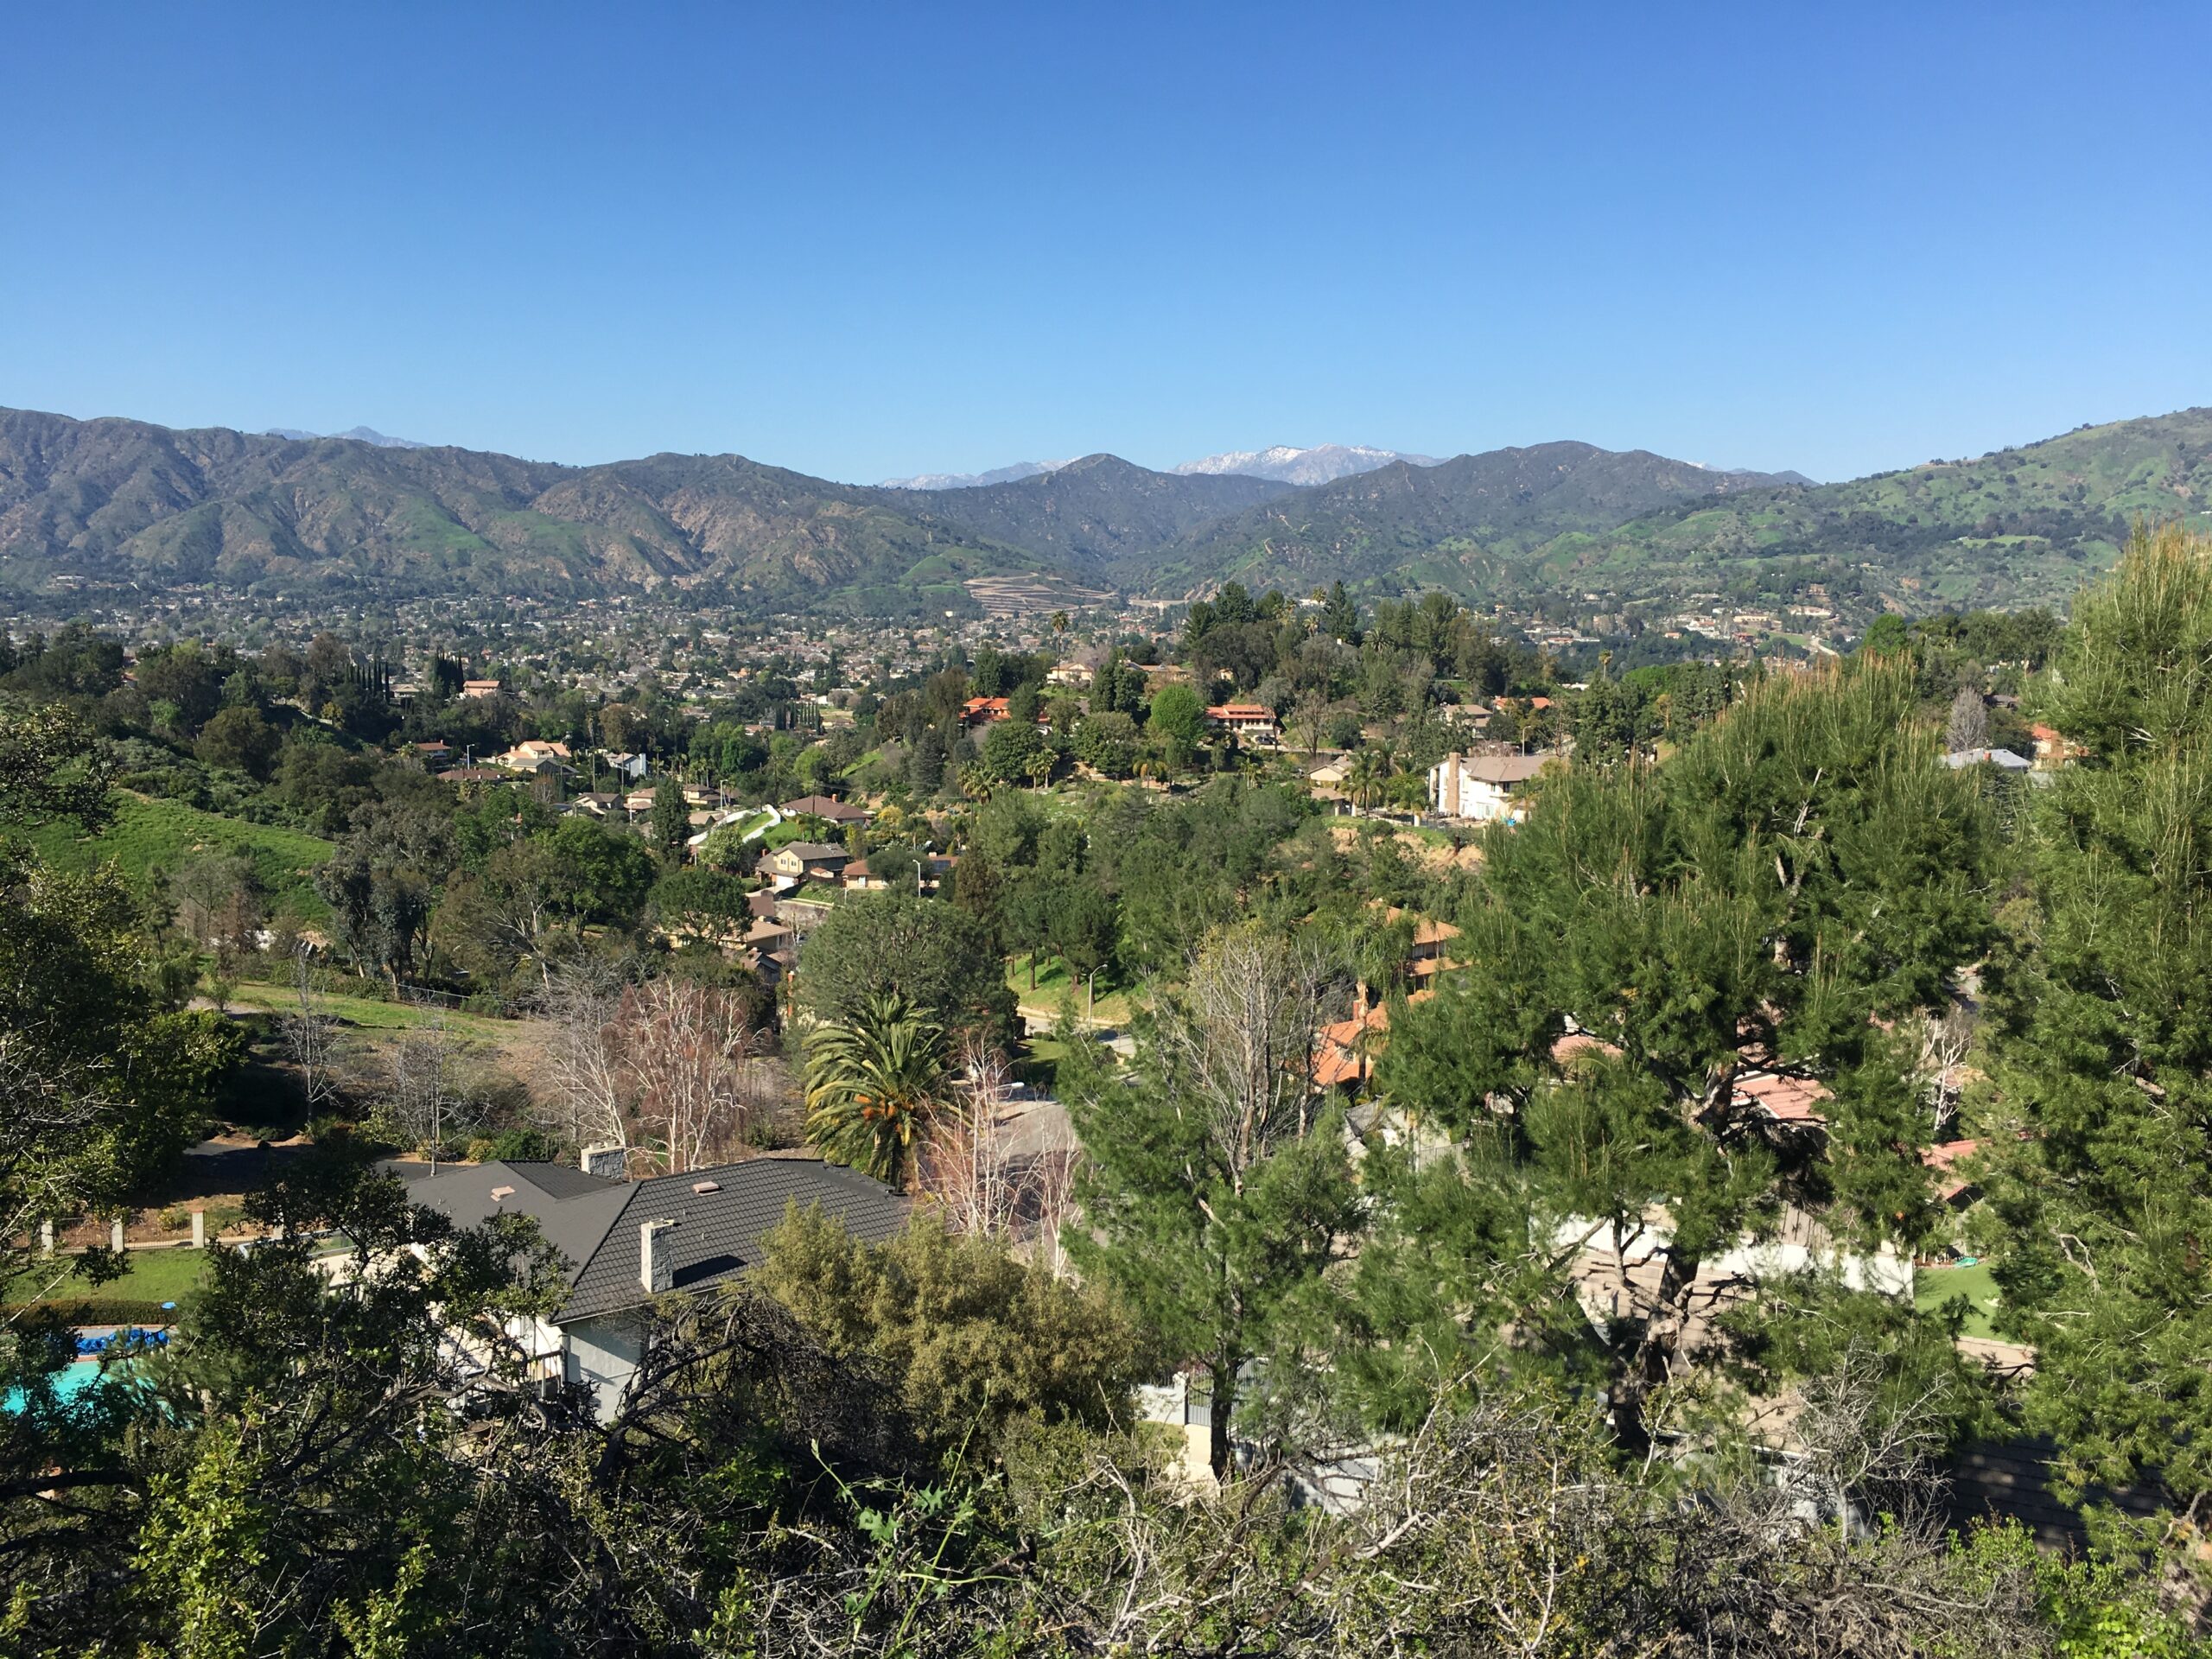 Glendora, CA: Embracing the Charm of the Foothills